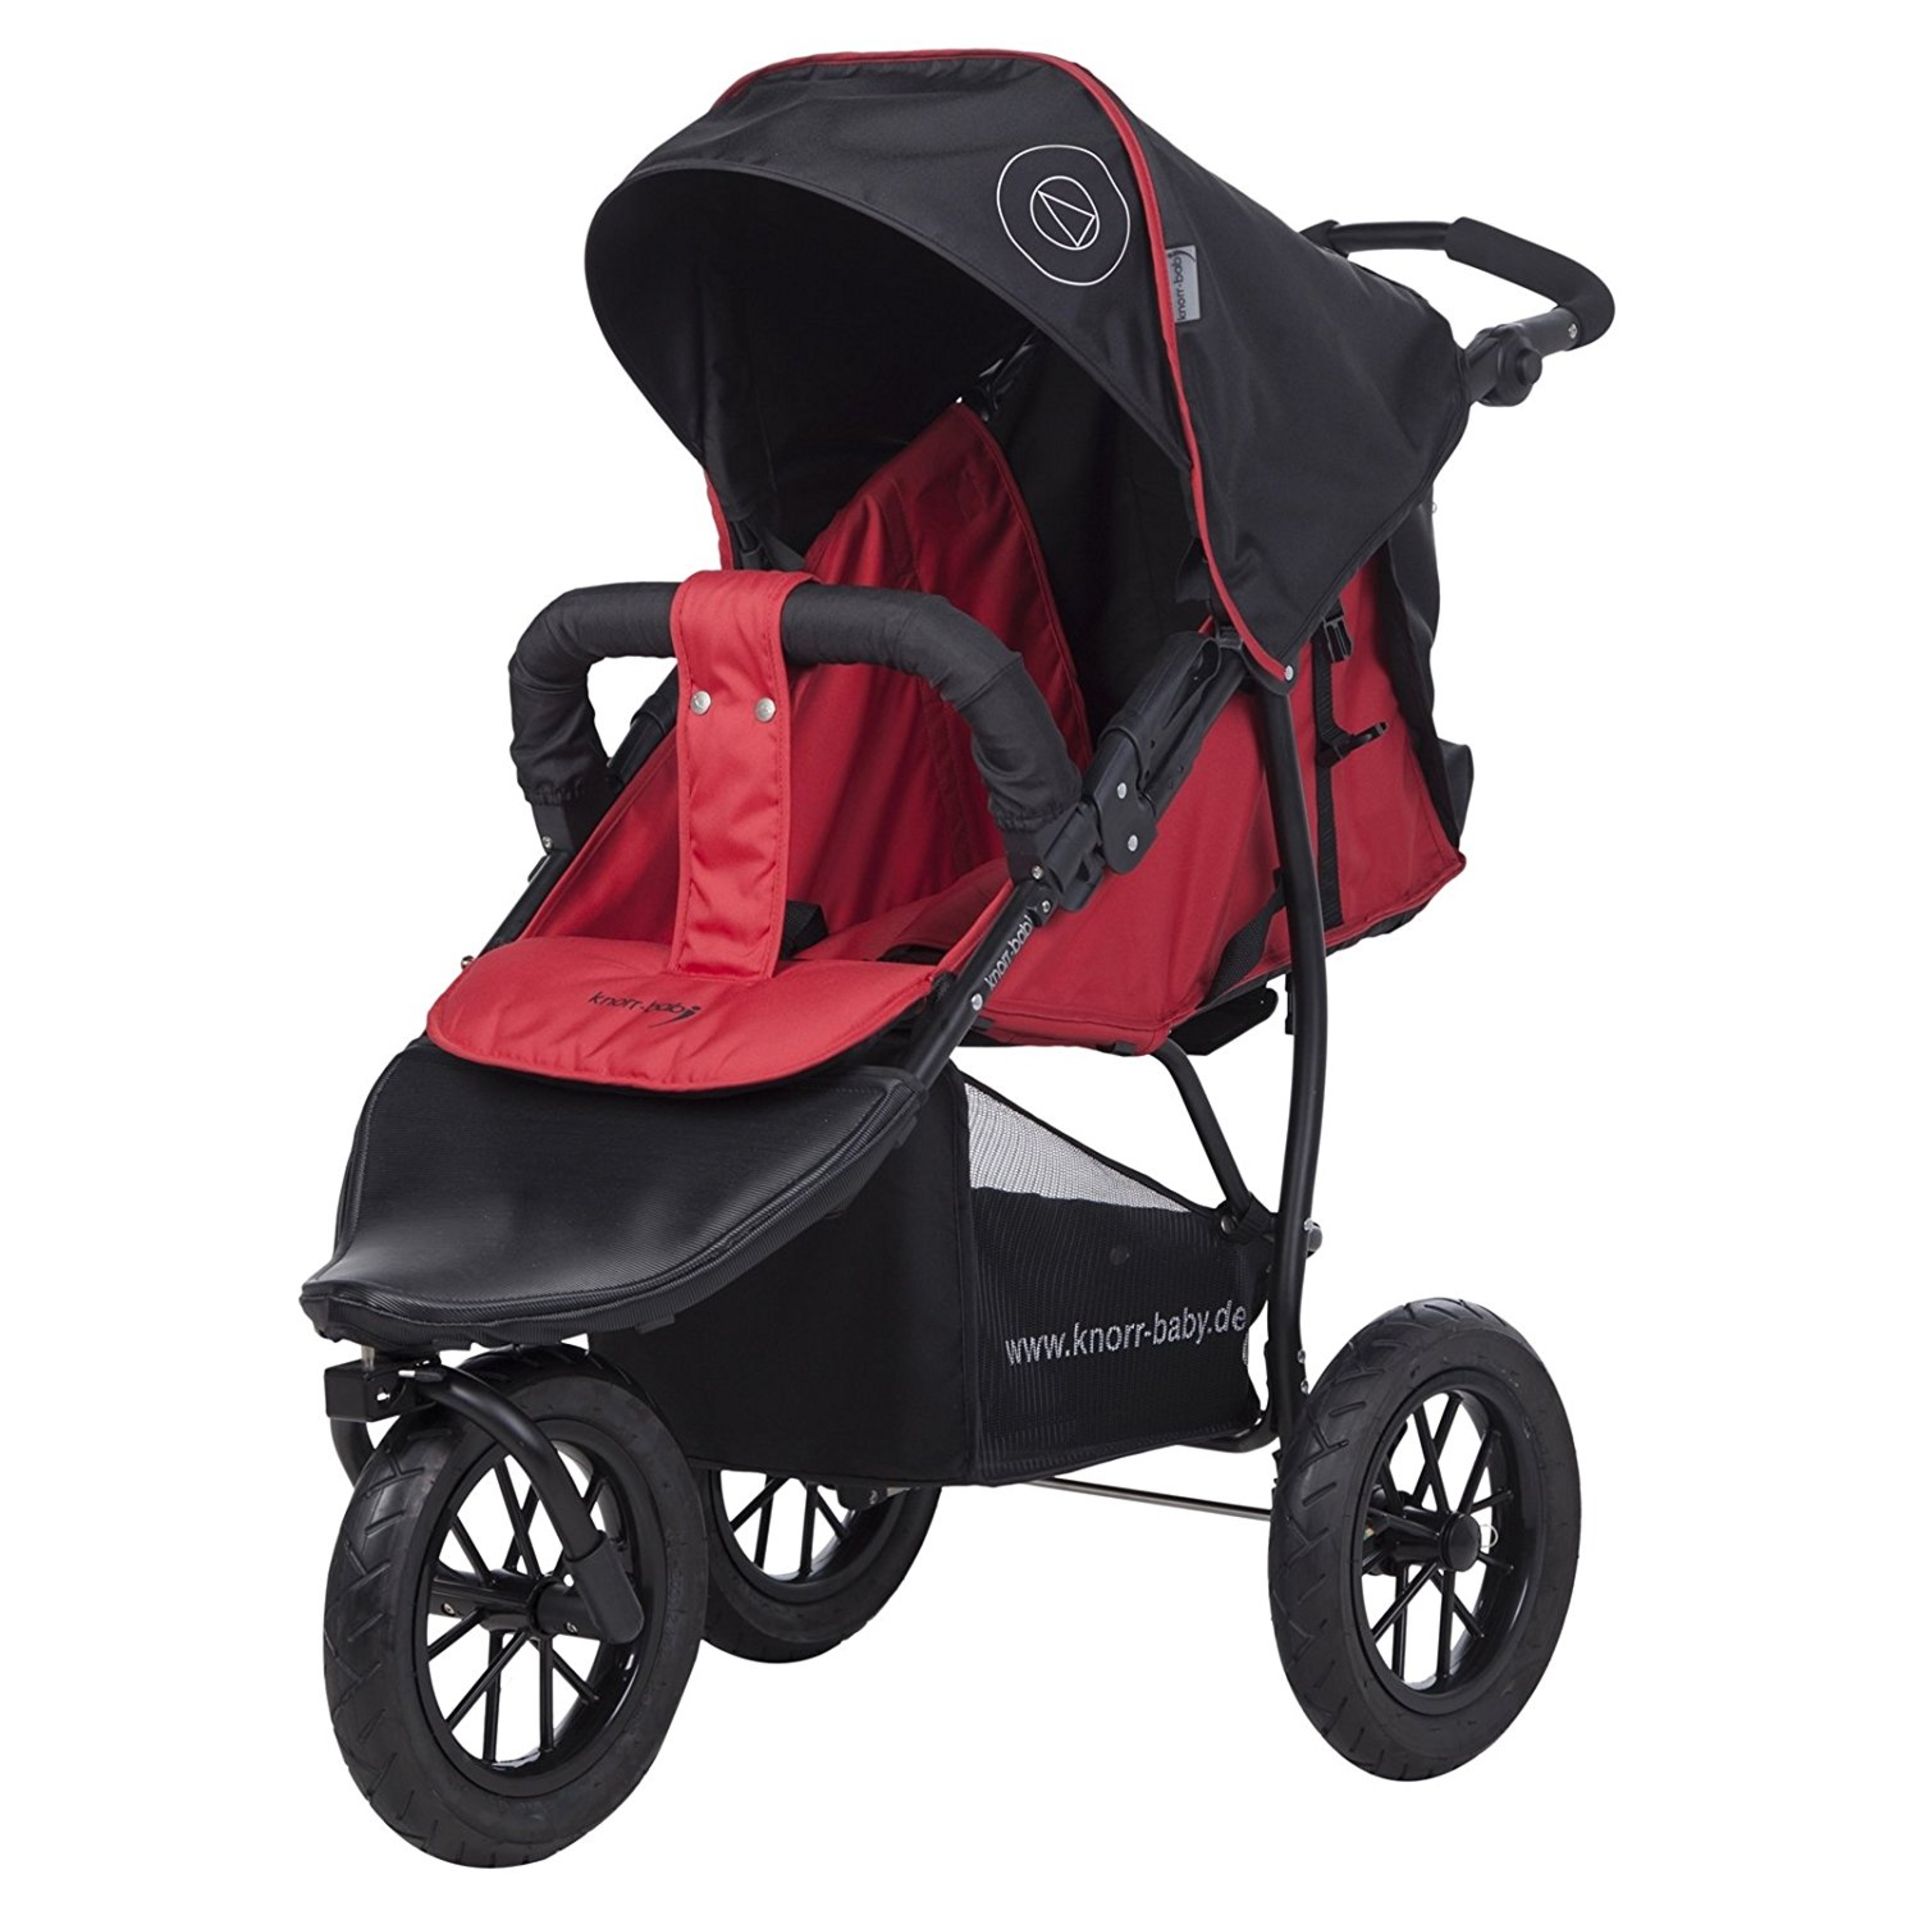 knorr-baby Joggy S Happy Colour with Sleep Shade RRP £169.99